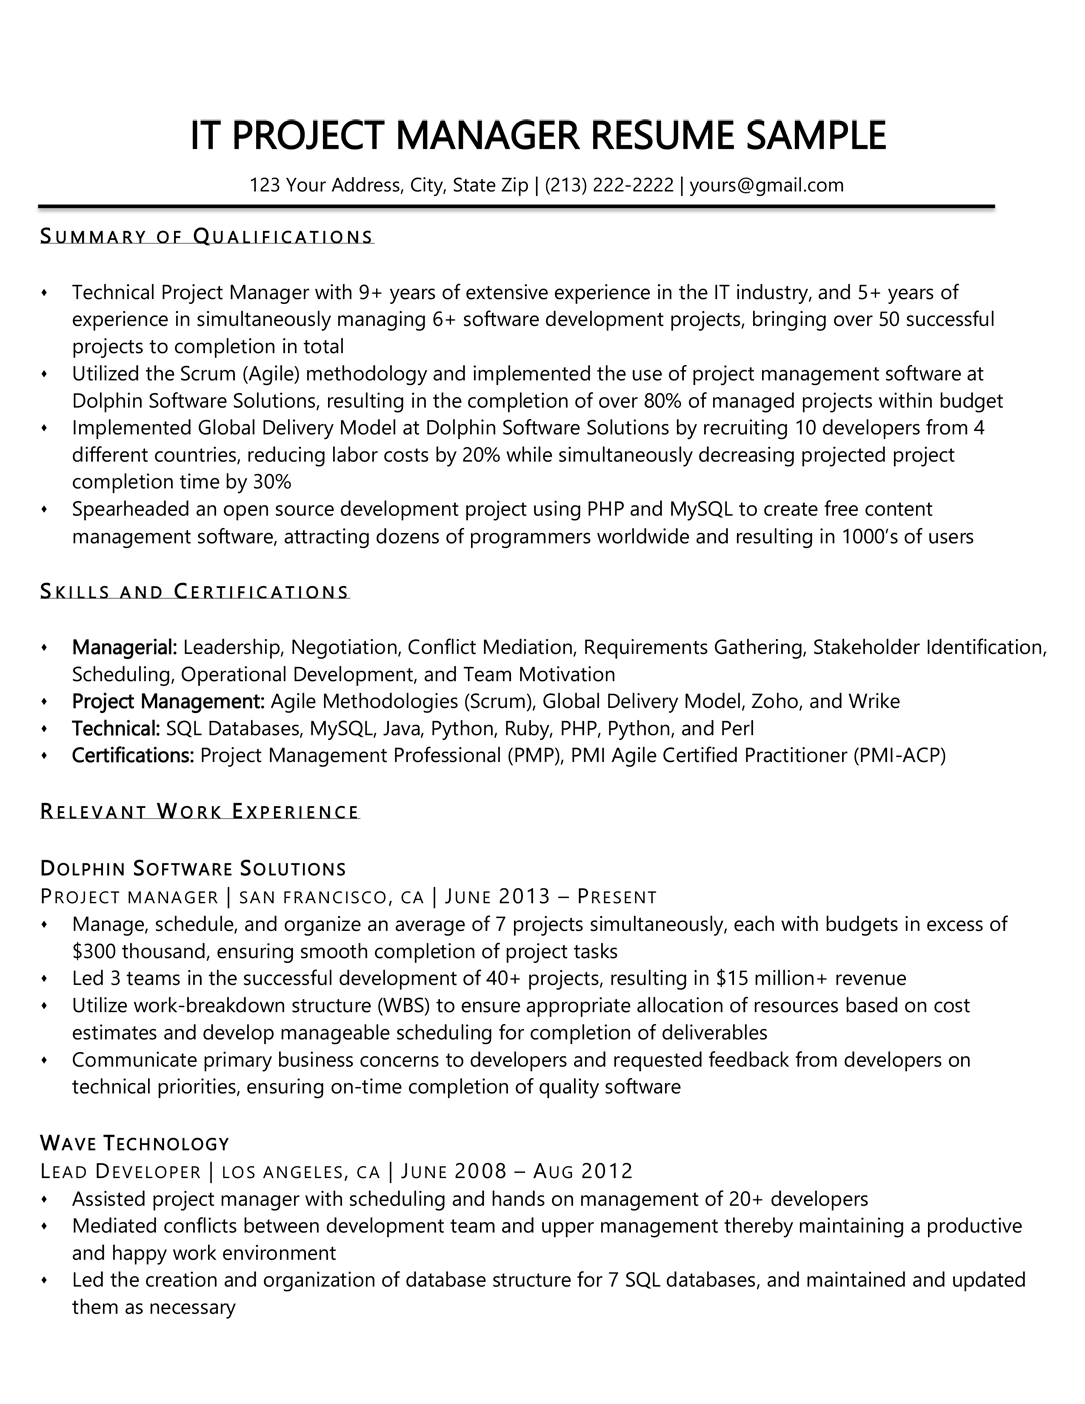 Project manager resume sample